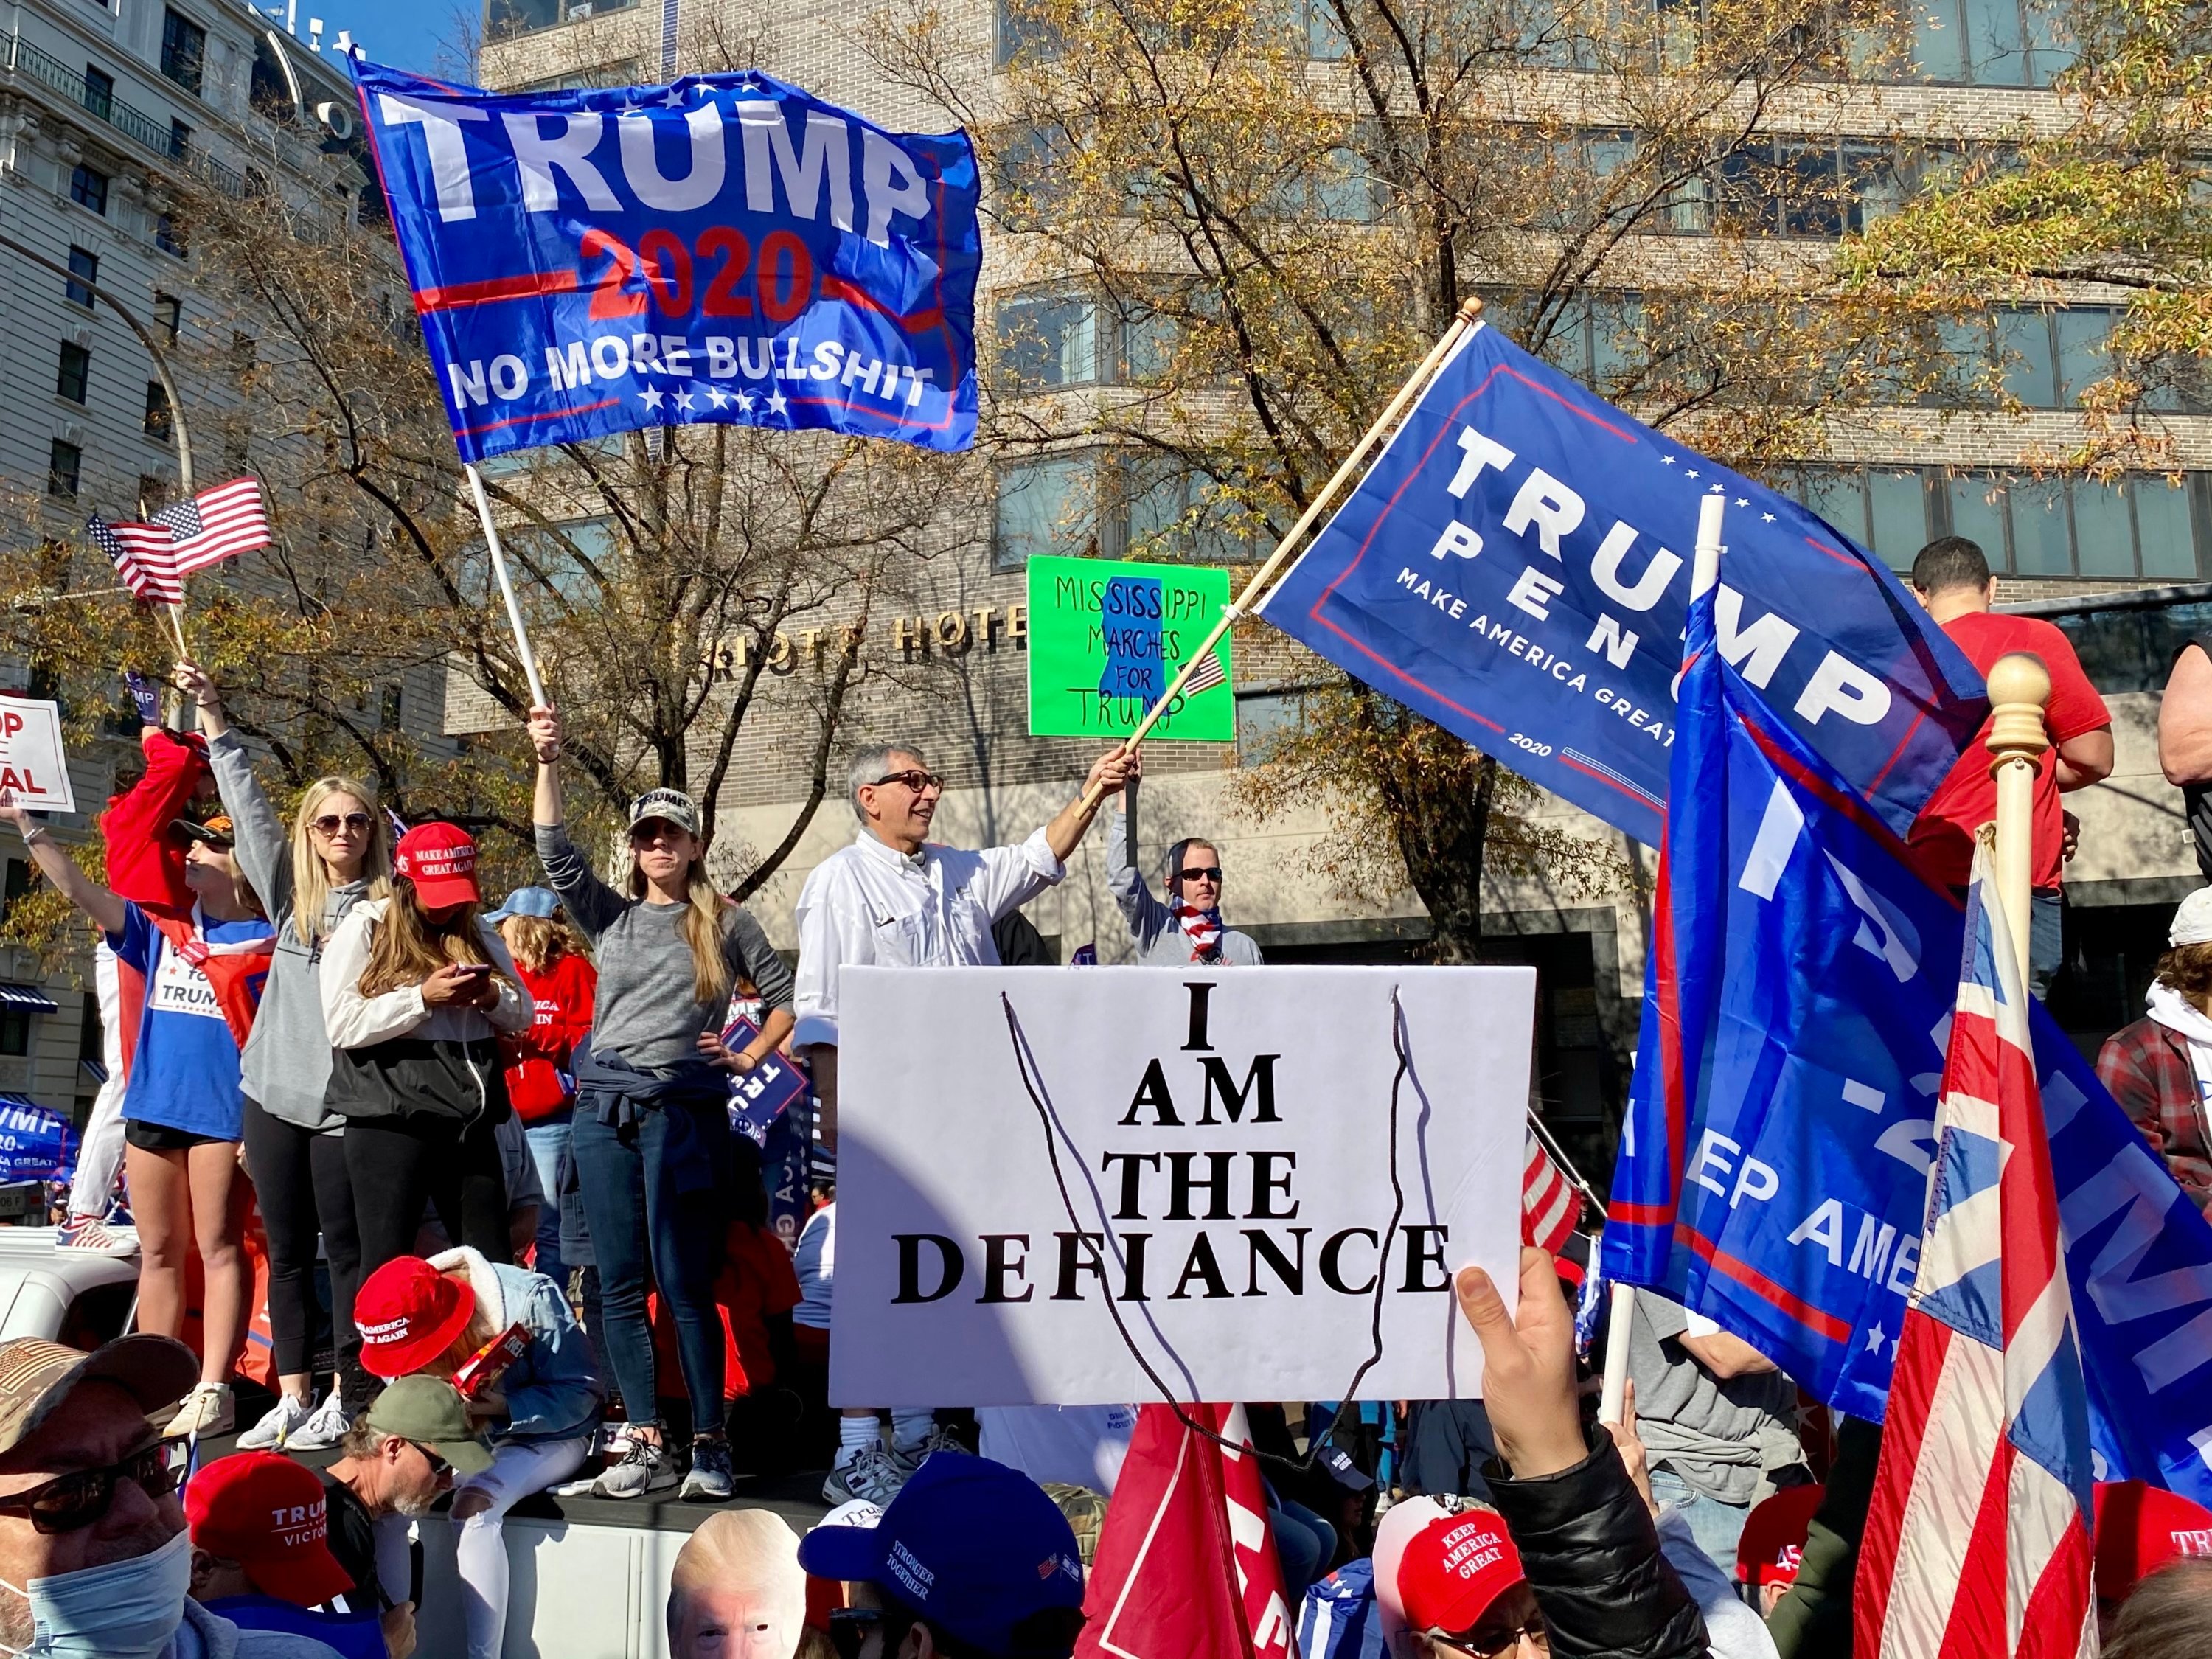 The Million MAGA March on November 14, 2020. Photograph by Evy Mages.